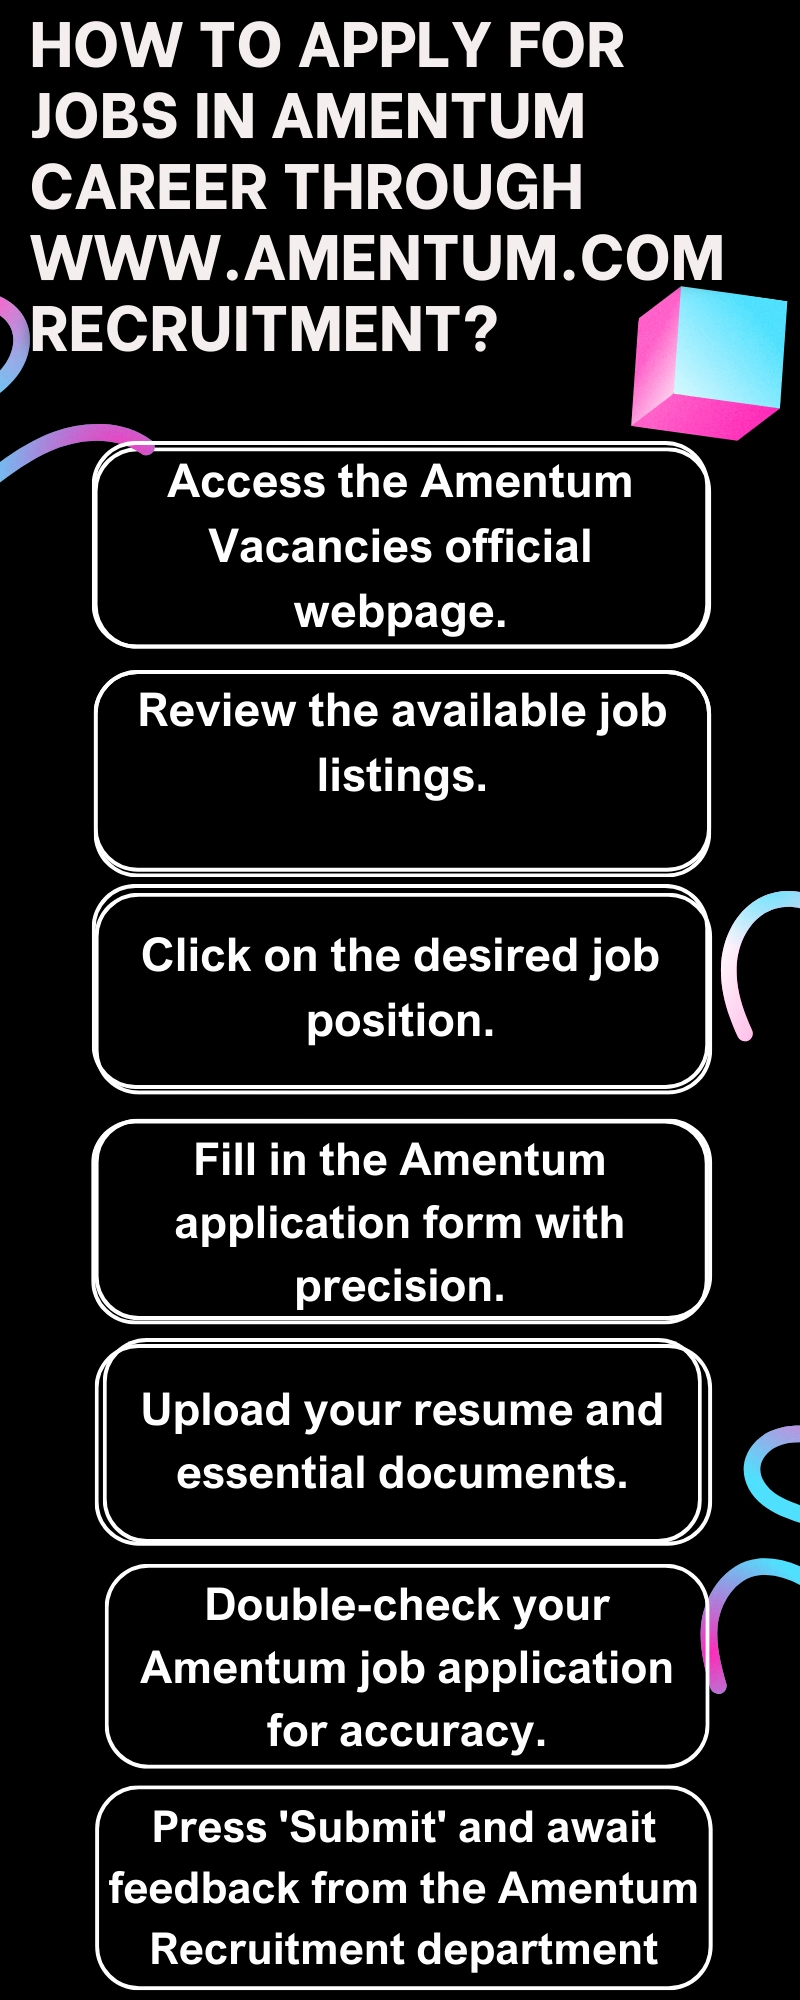 How to Apply for Jobs in Amentum Career through www.amentum.com recruitment?